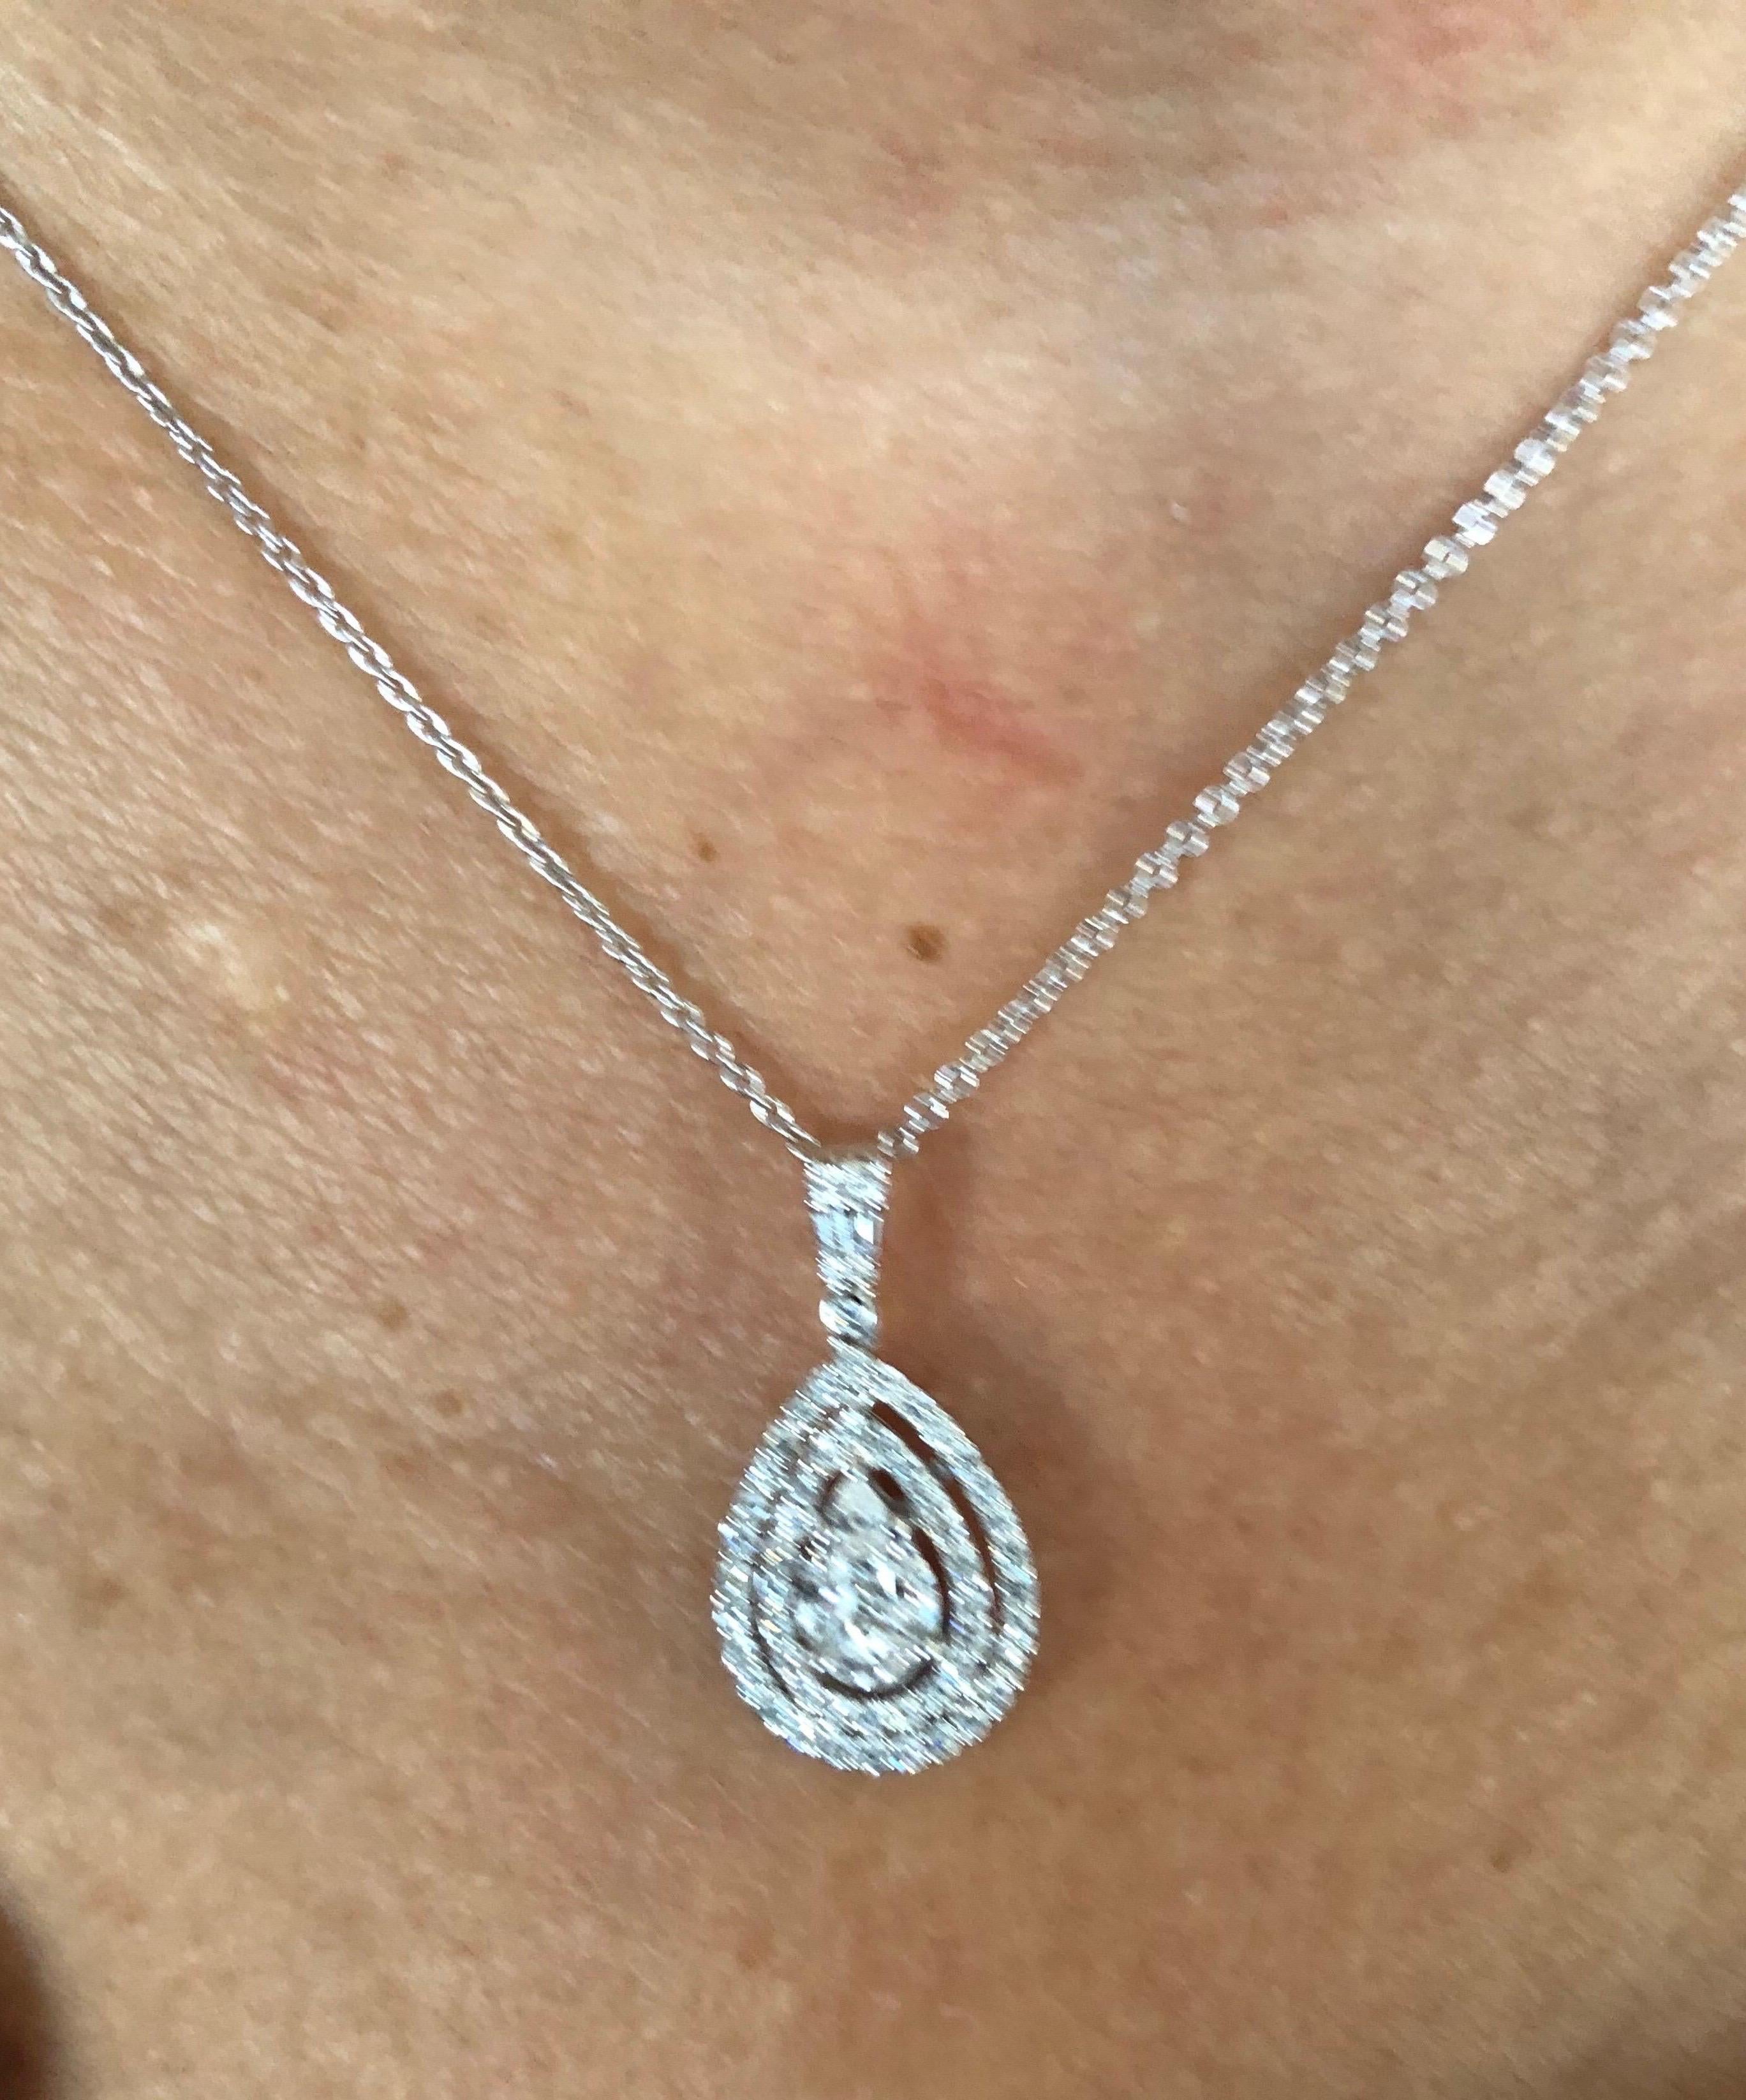 18 Karat White Gold Pear Shaped Diamond Pendant In New Condition For Sale In Great Neck, NY